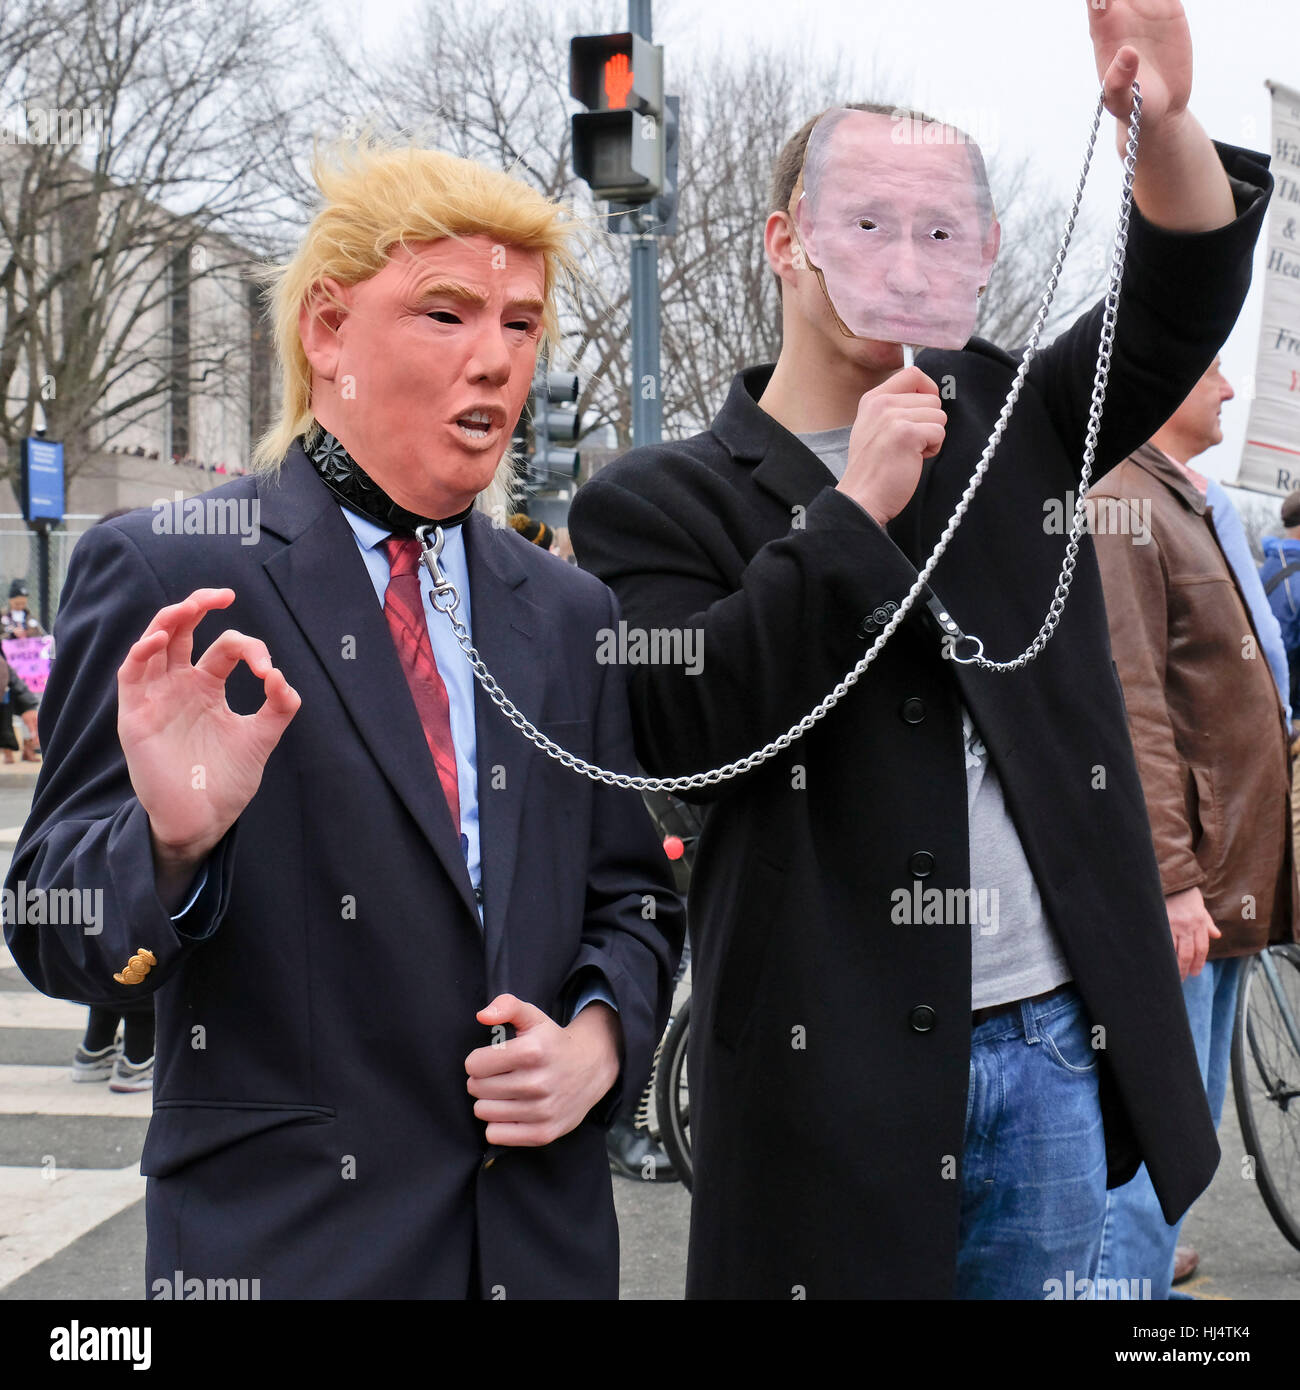 Two men imitating Trump and Putin with a dog chain around Trump's neck at the Women's March on Washington DC on January 21 2017 Stock Photo